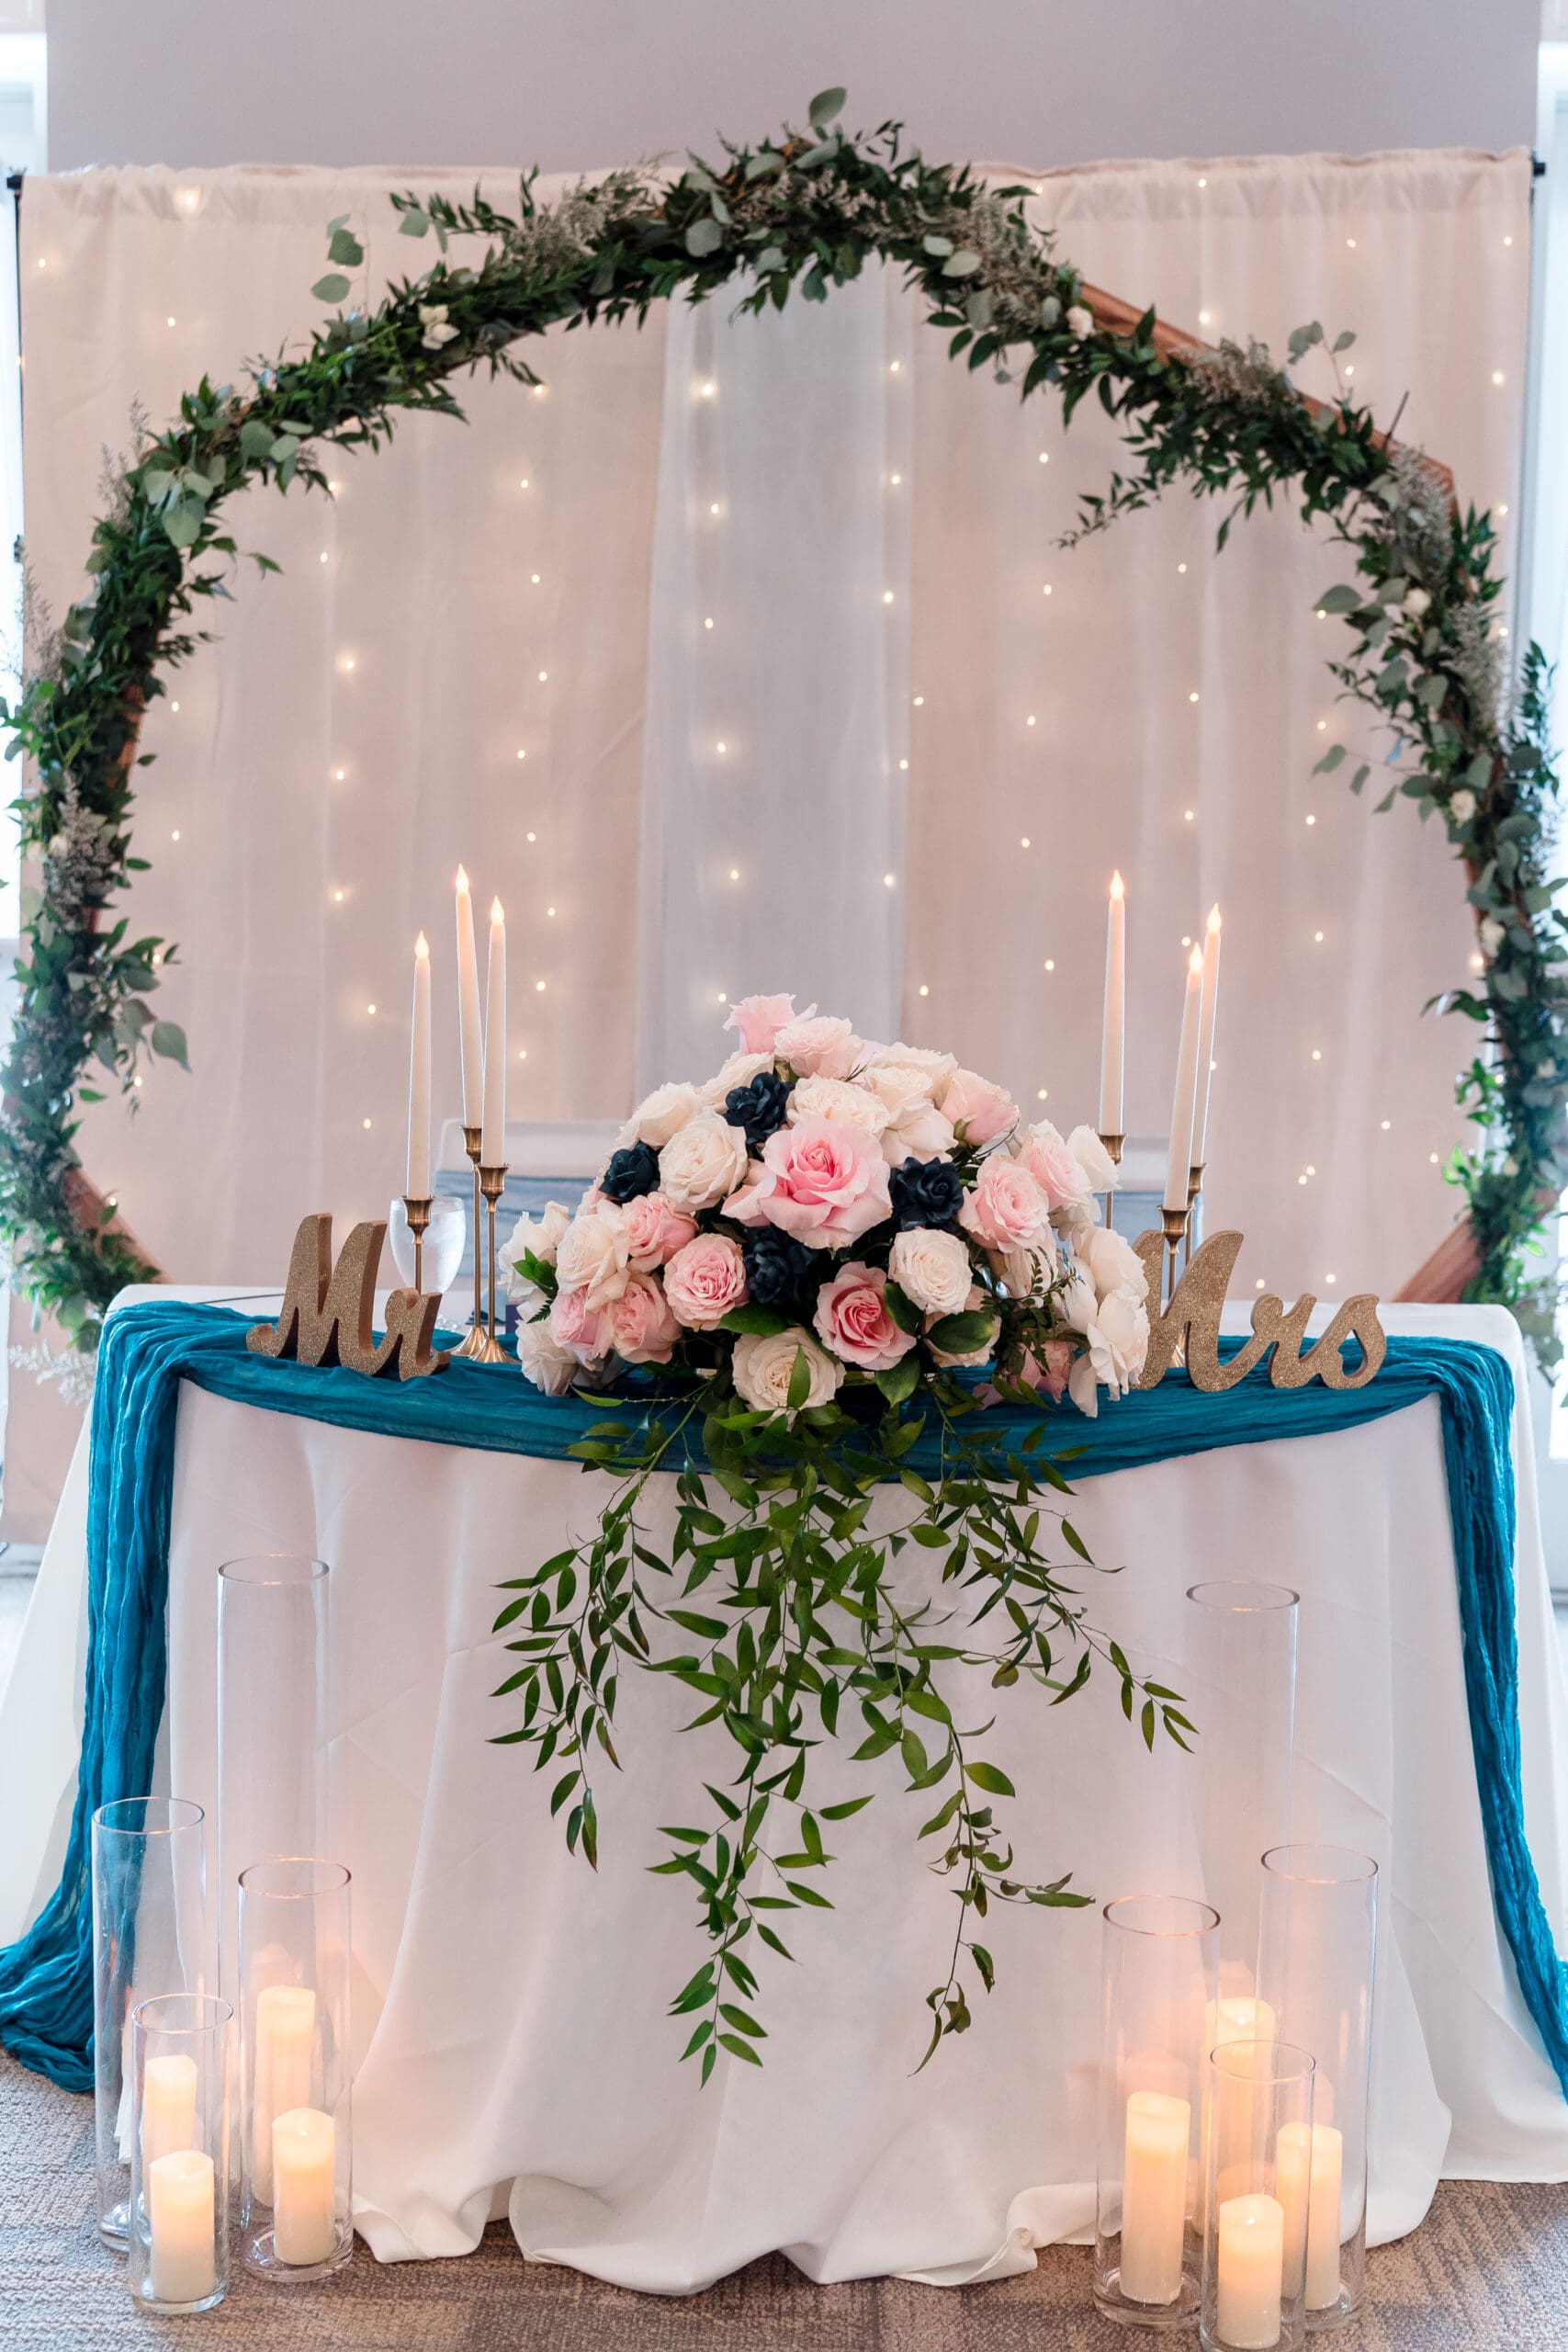 Decorated Mr. and Mrs. Table with Flowers and Candles at Island Grove Recreation Center